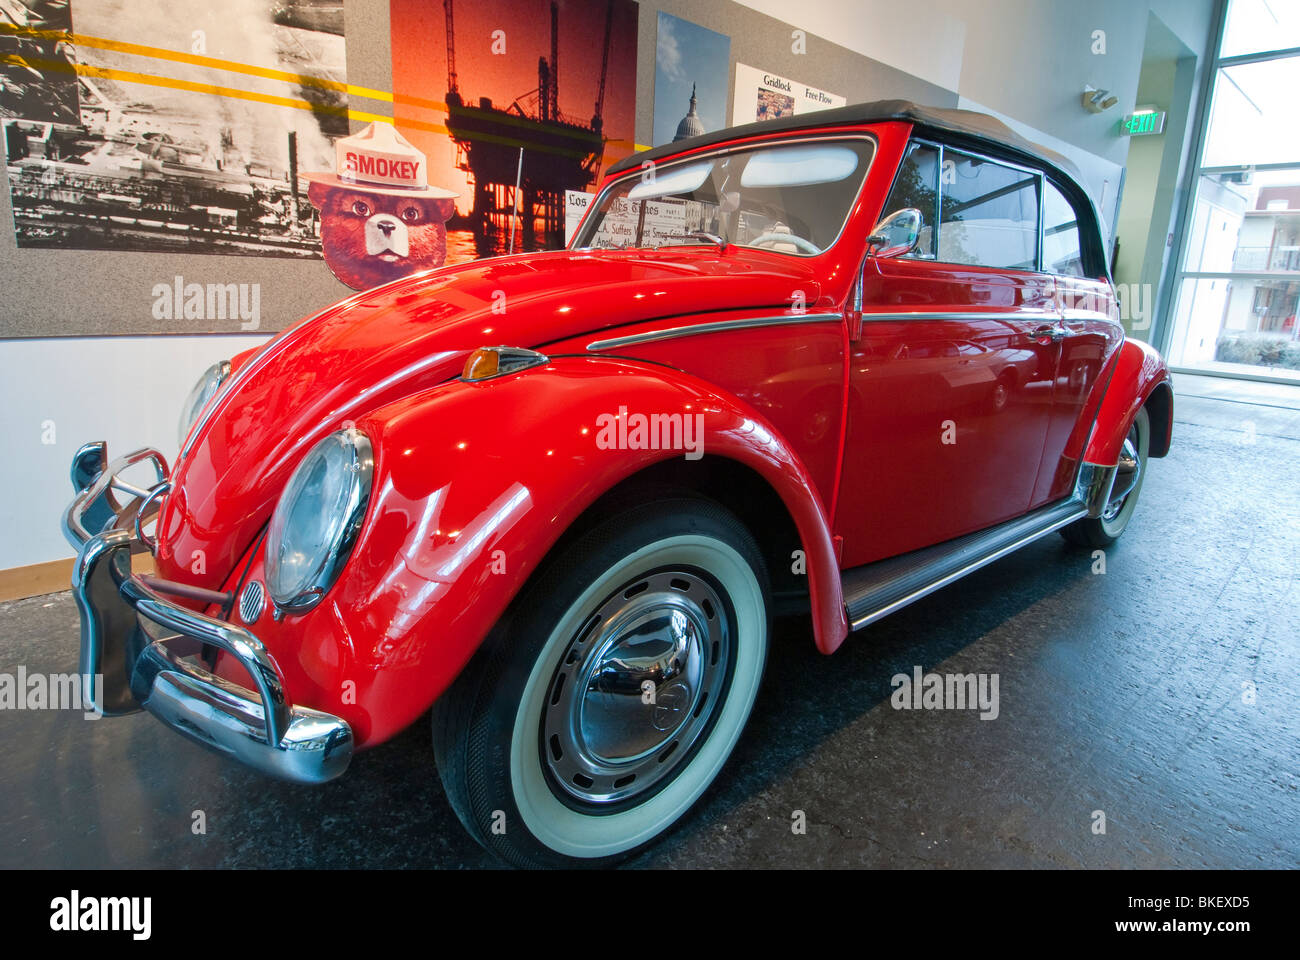 Volkswagen Beetle 1200 High Resolution Stock Photography and Images - Alamy